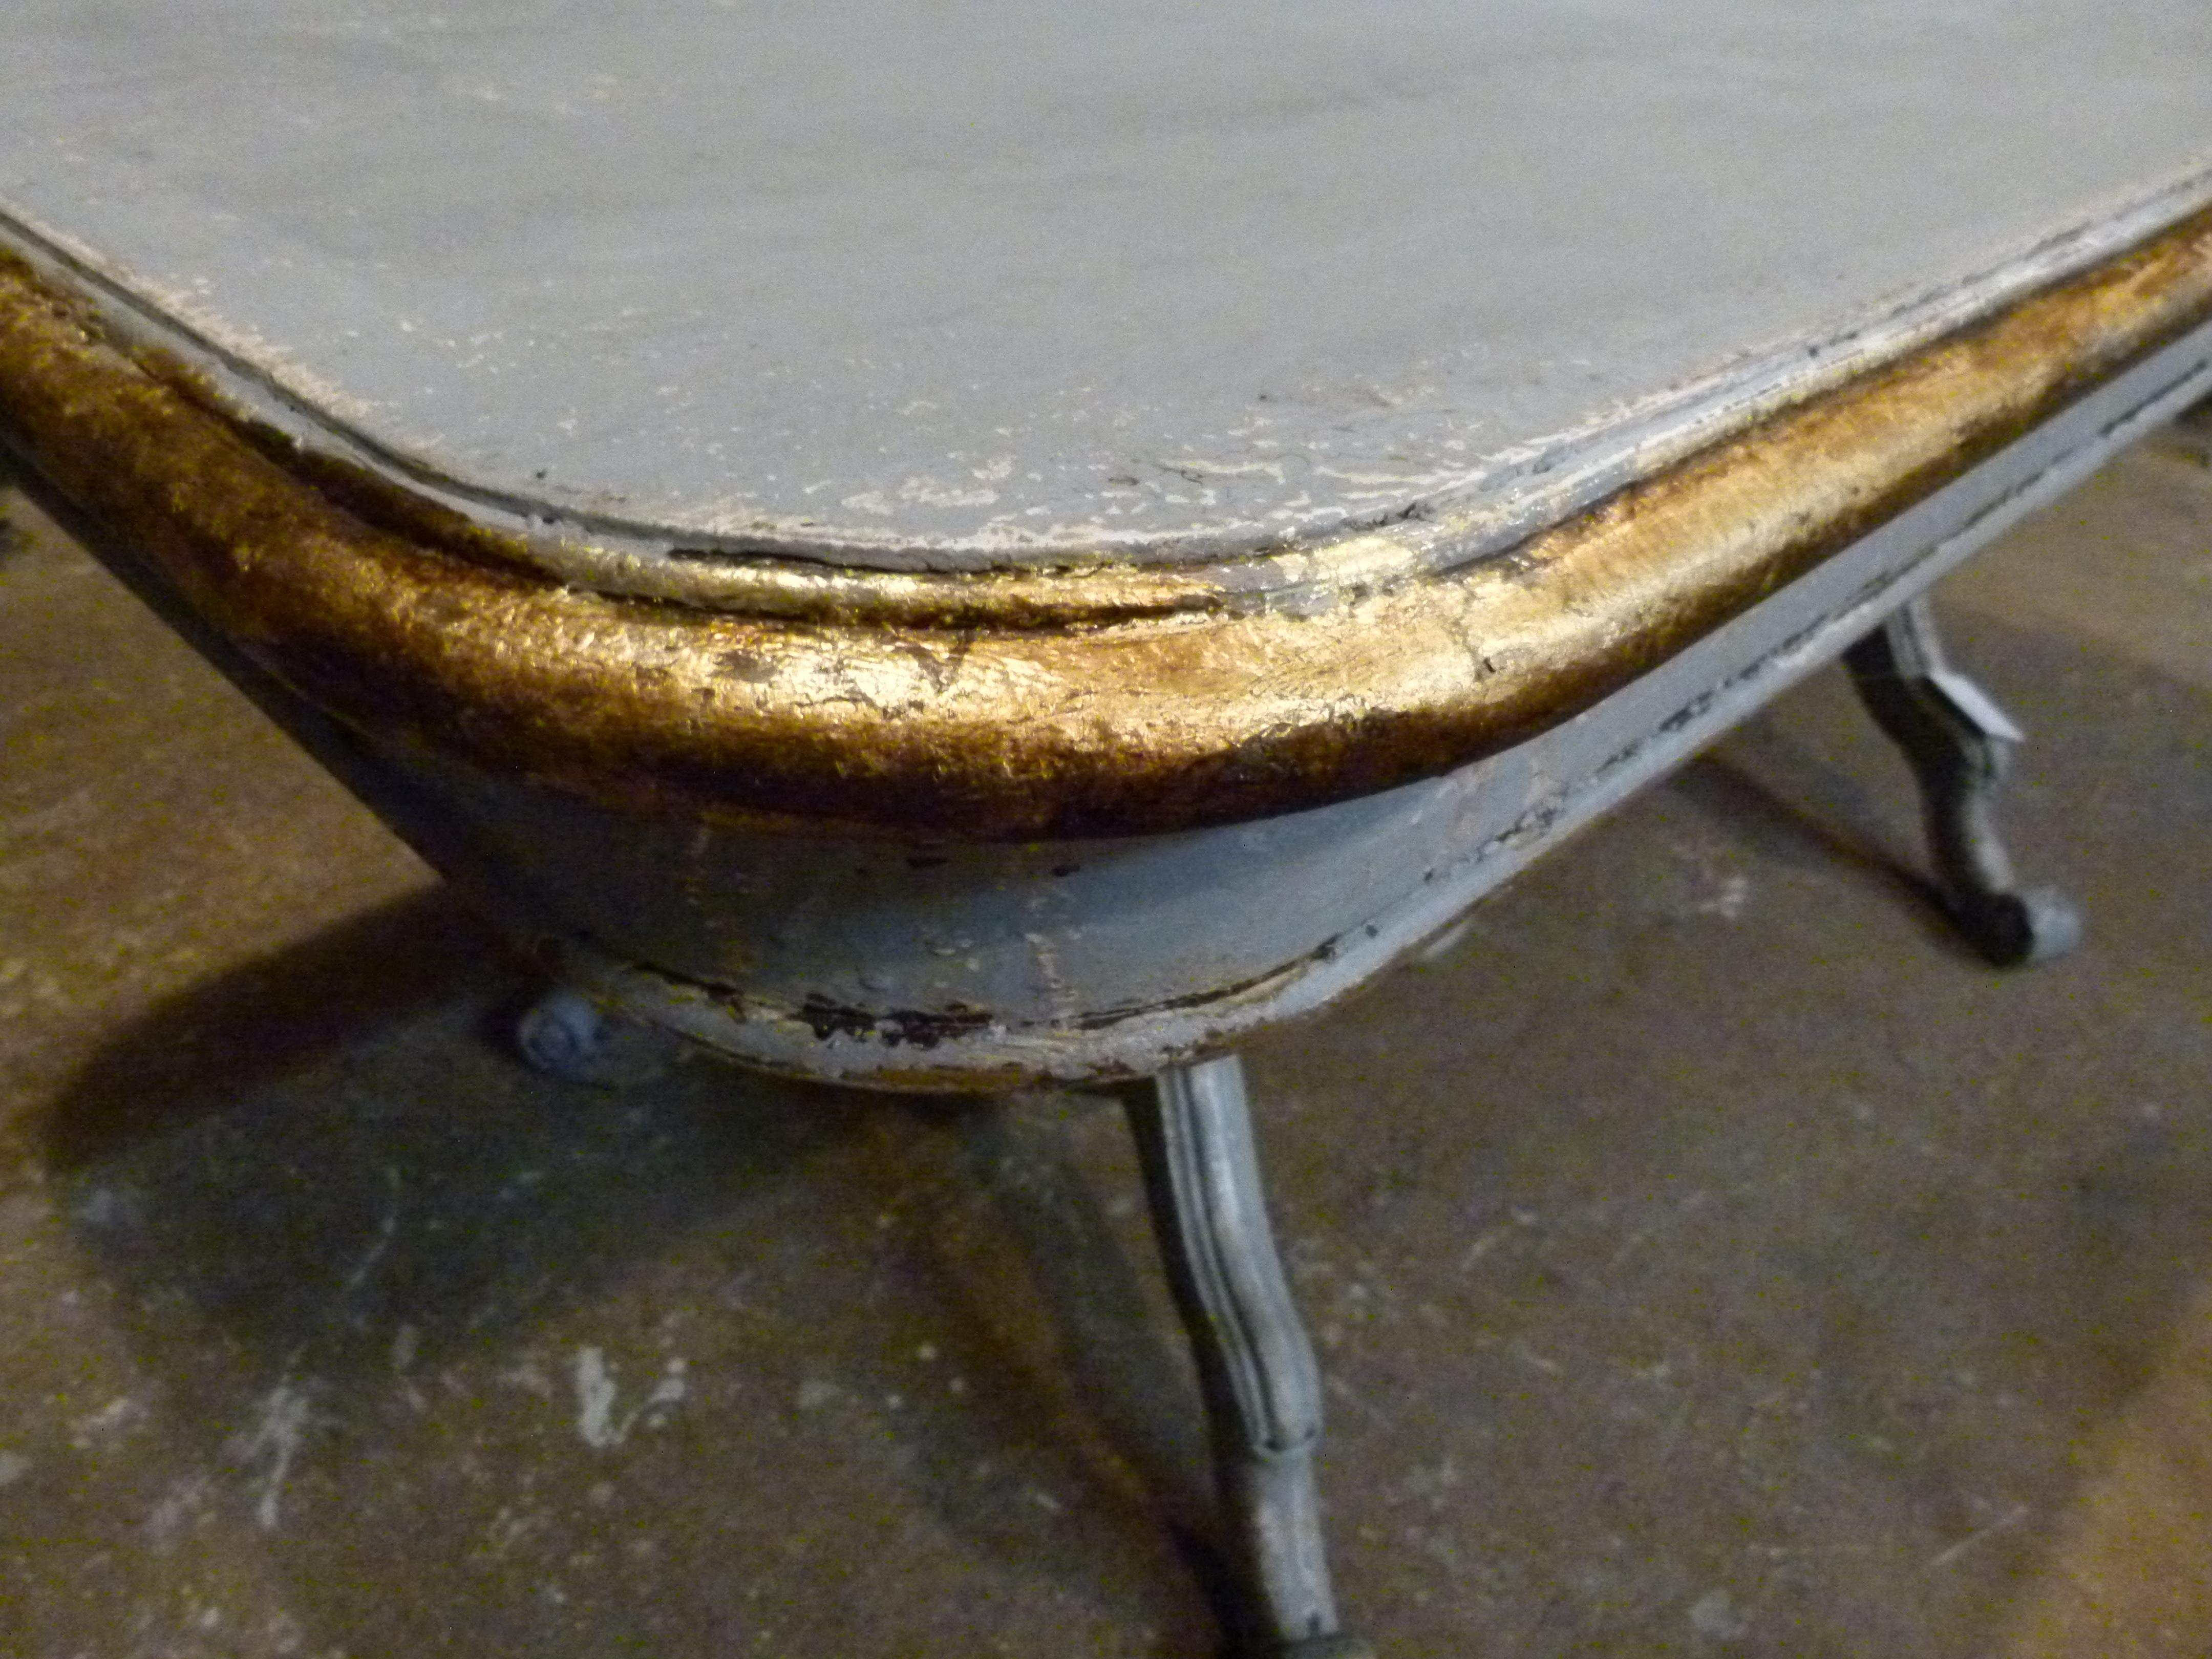 19th century French table with a grey color patina.
The table board is with rounded corners and a gold painted profile. Table legs are also decorated with gold and have the same patina color.